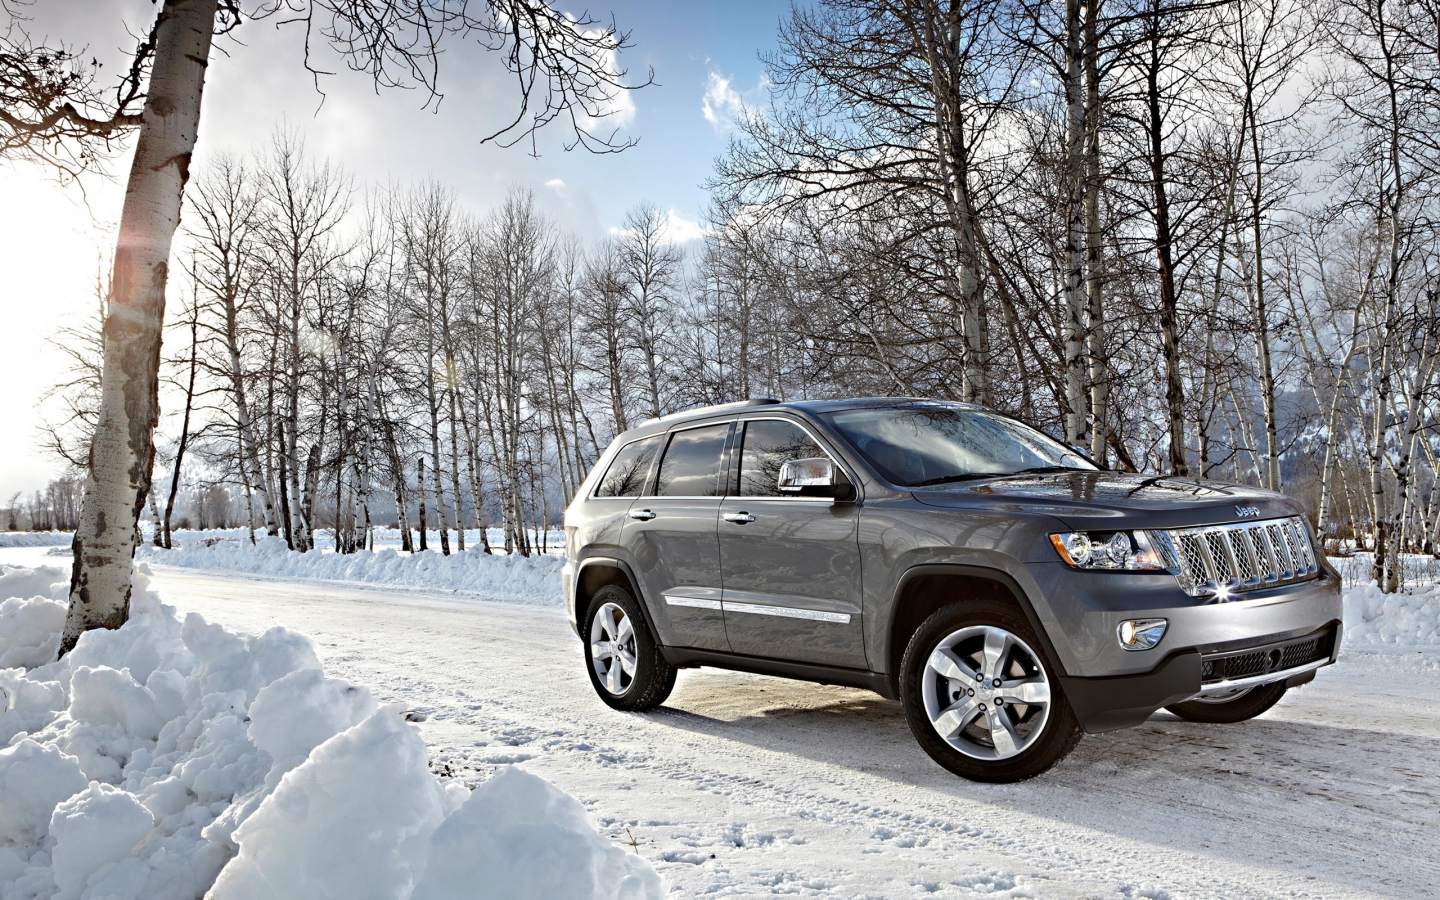 2012 Jeep Grand Cherokee for 1440 x 900 widescreen resolution